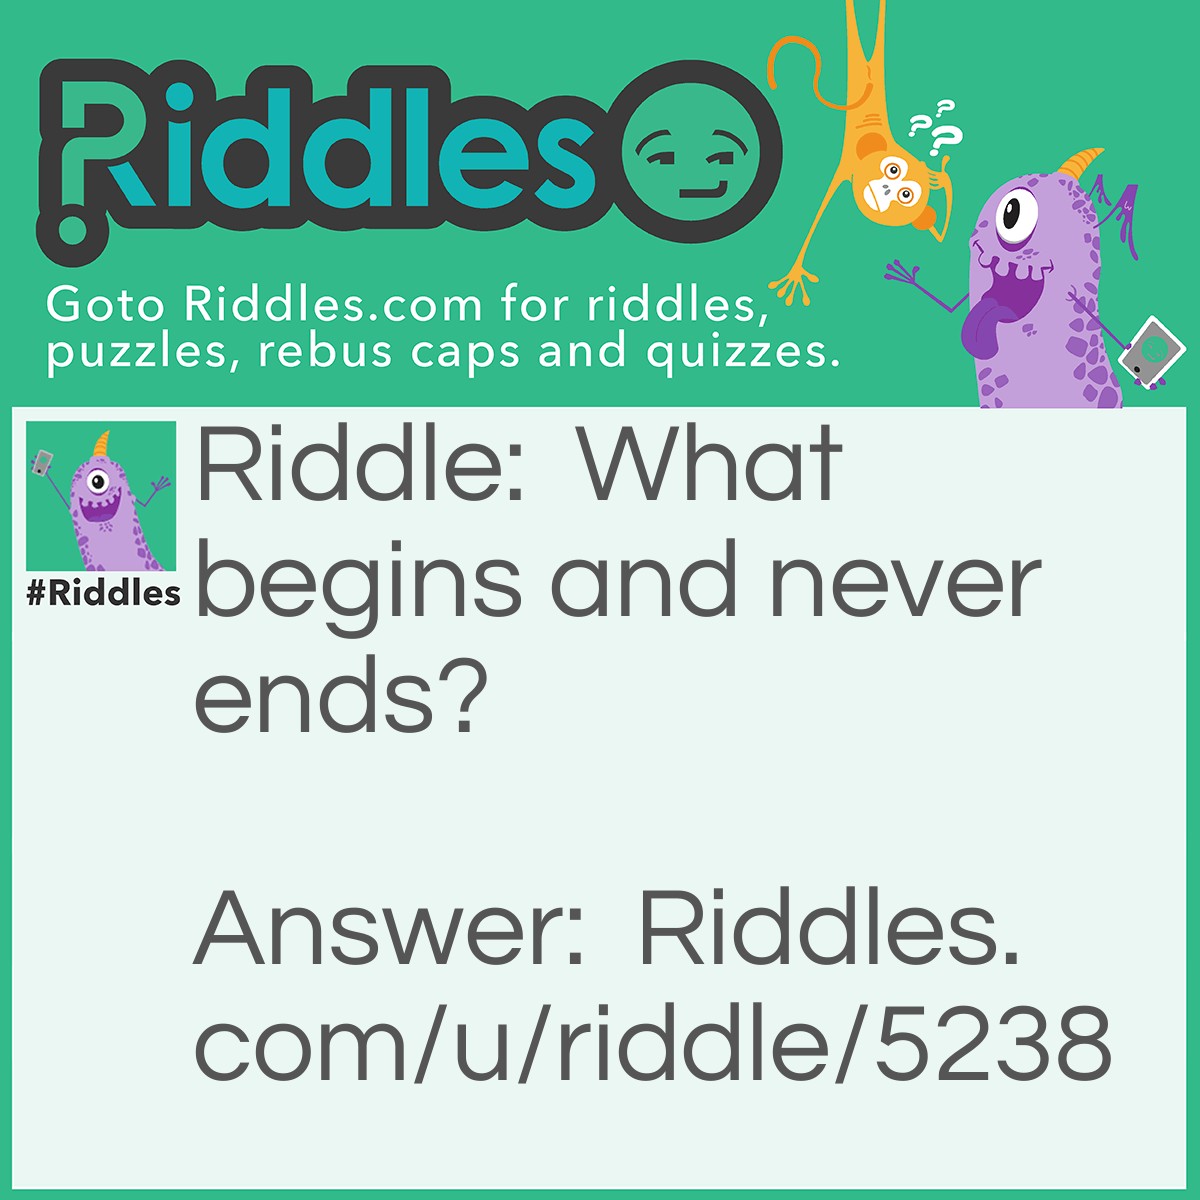 Riddle: What begins and never ends? Answer: Death.